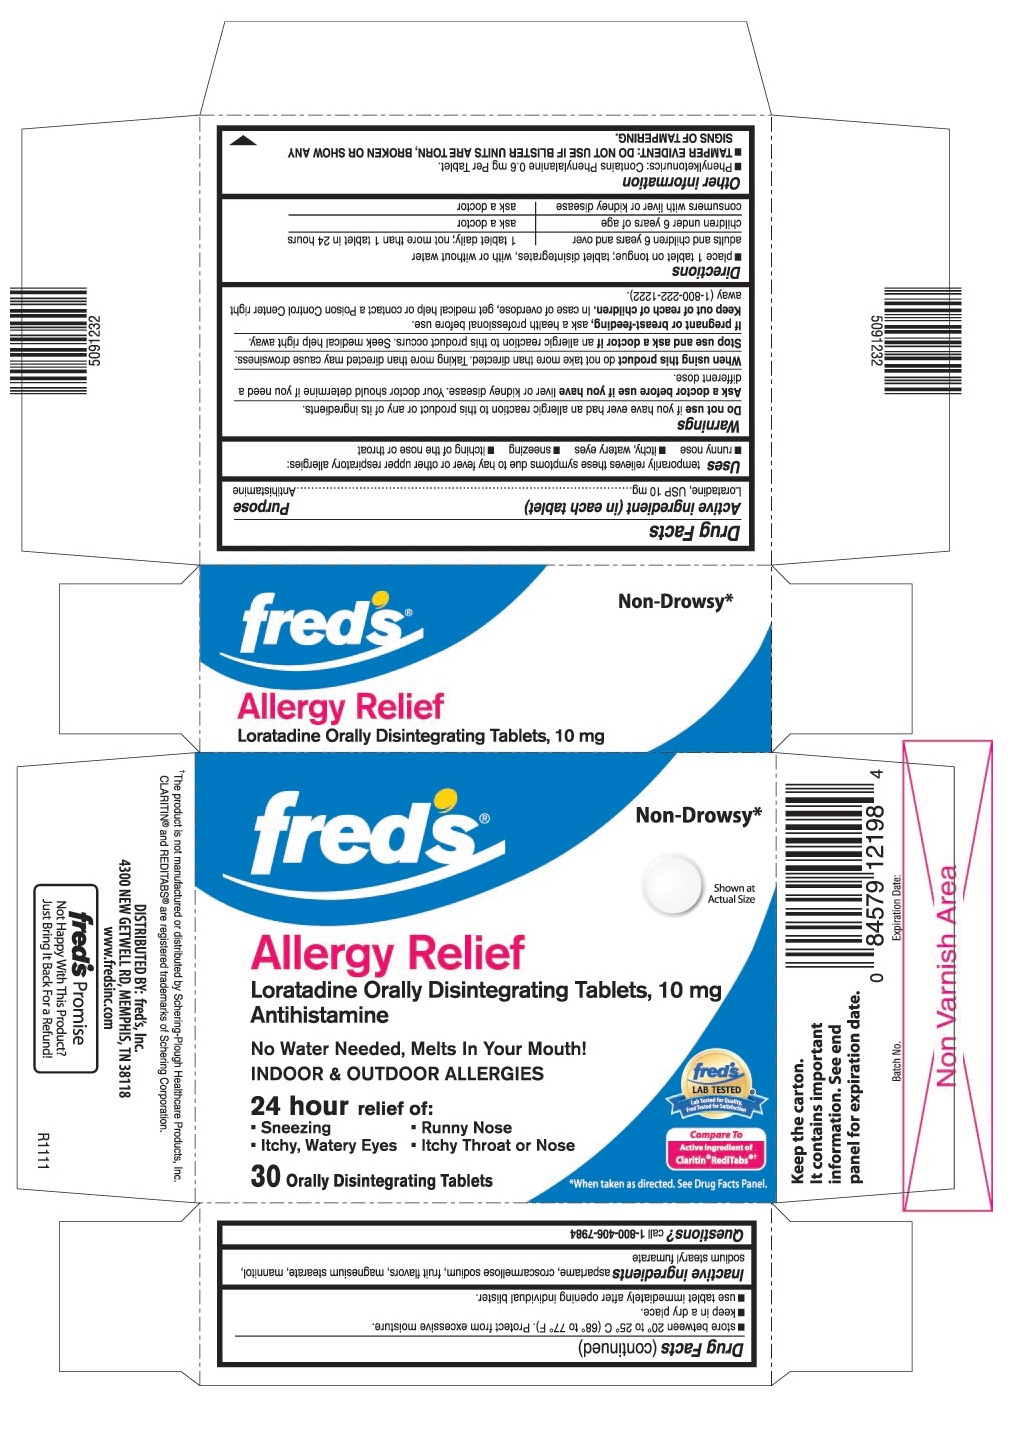 This is the 30 count blister carton label for Fred's Loratadine ODT, 10 mg.